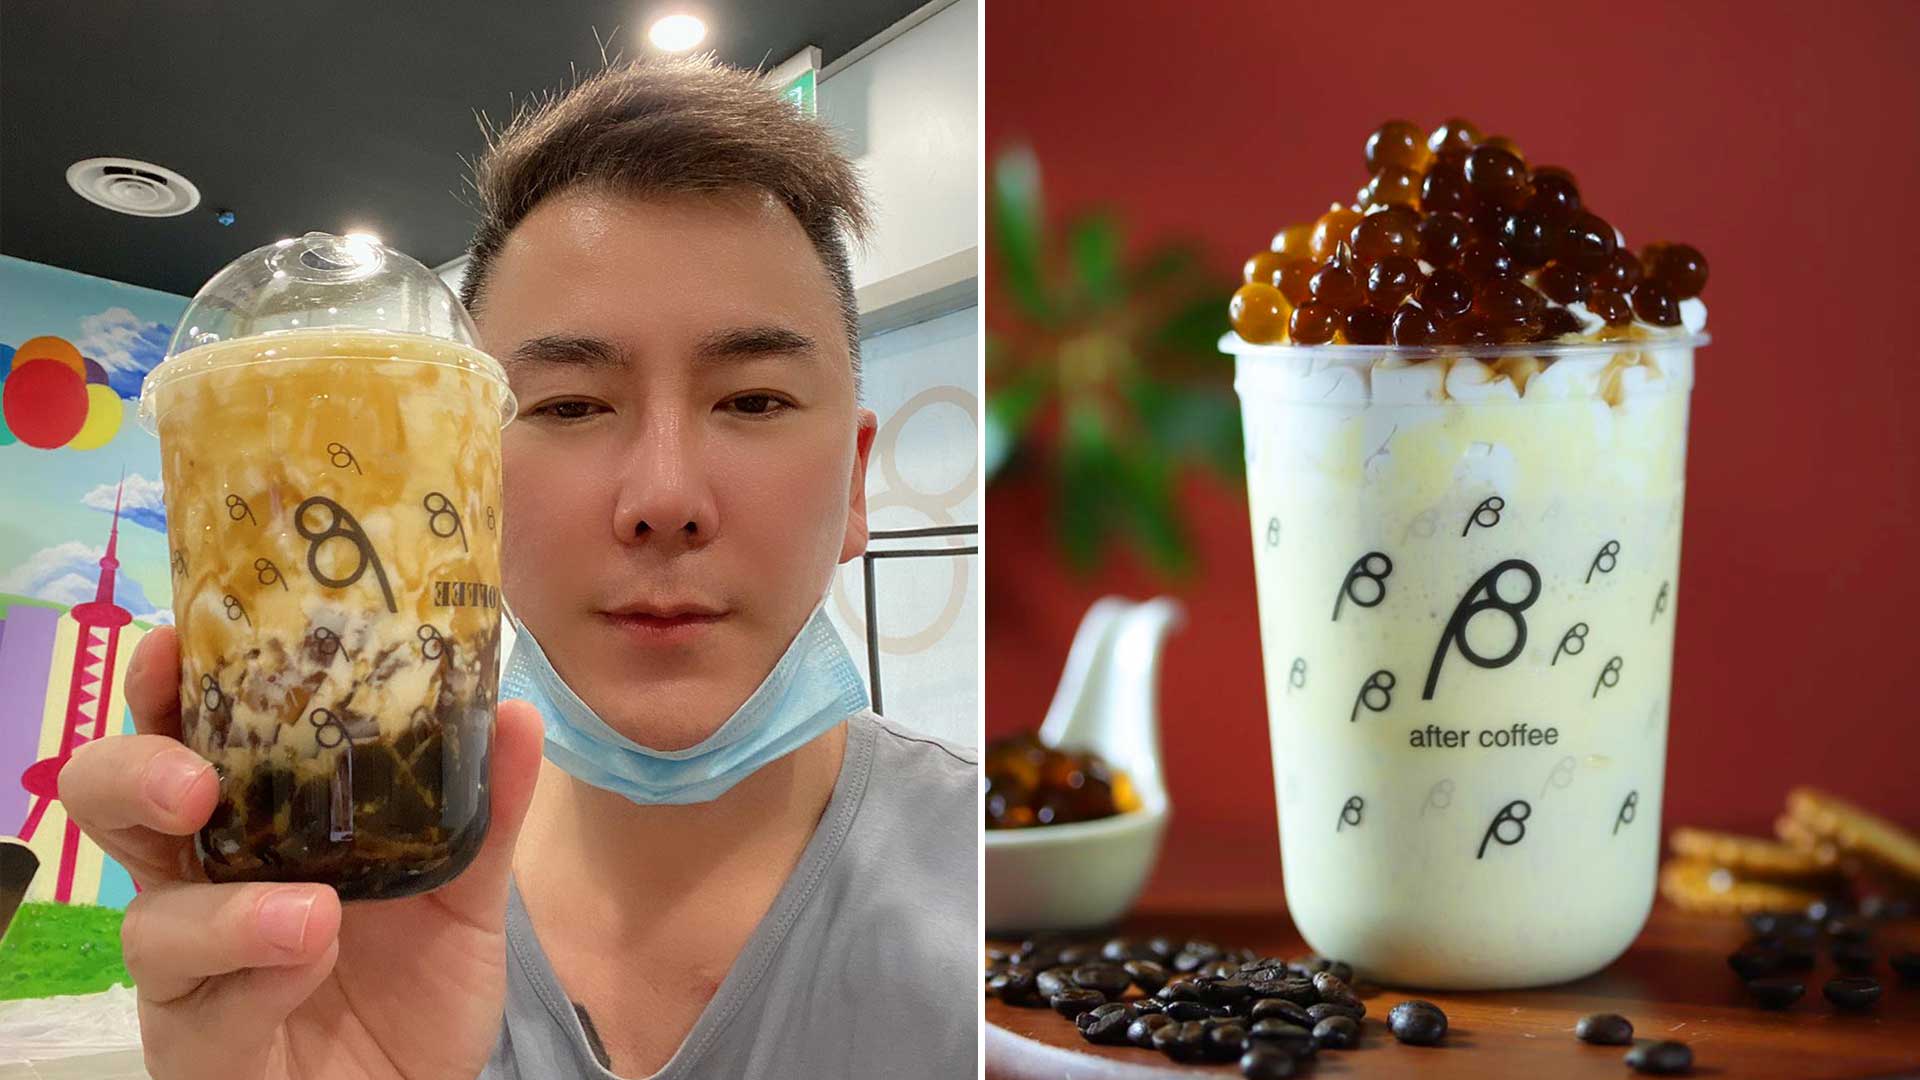 Celeb Hairstylist Addy Lee Opening Dessert Café, Salted Egg Bubble Tea On The Menu